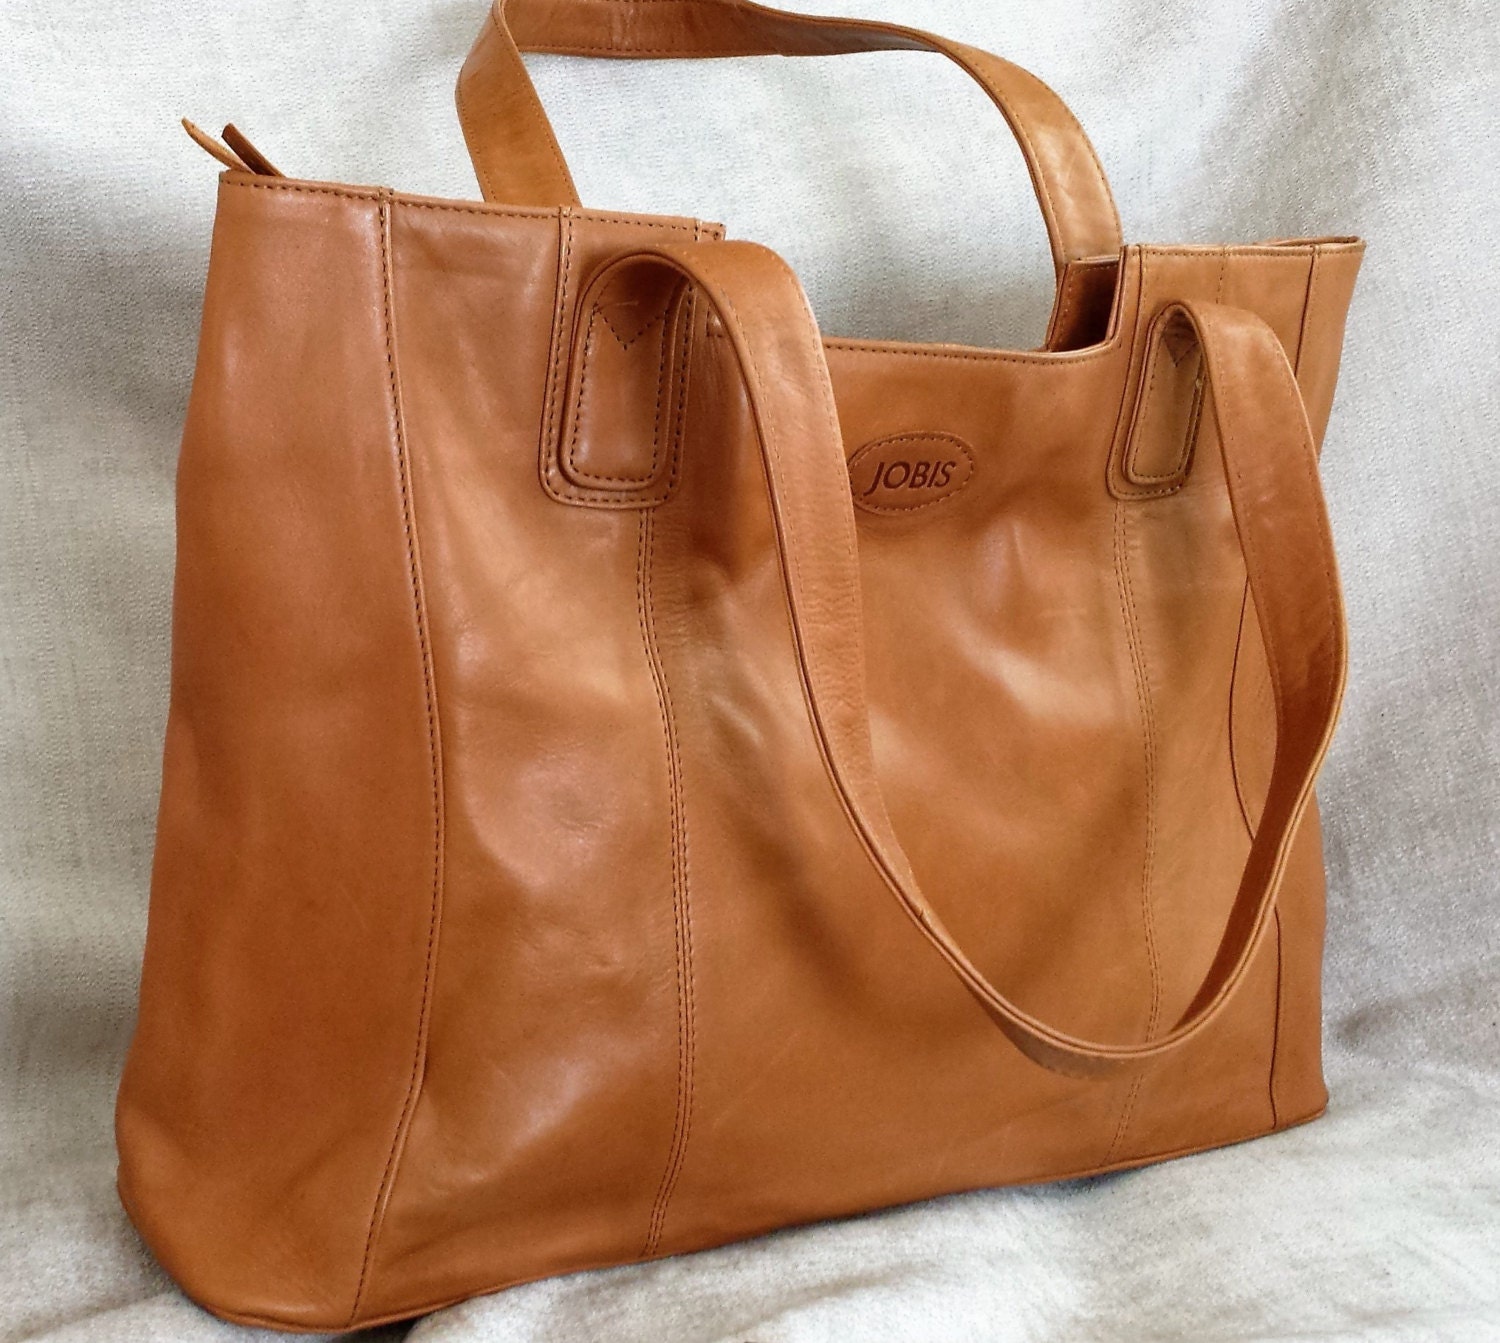 Large Leather Tote Jobis Caramel Brown Leather Tote Bag